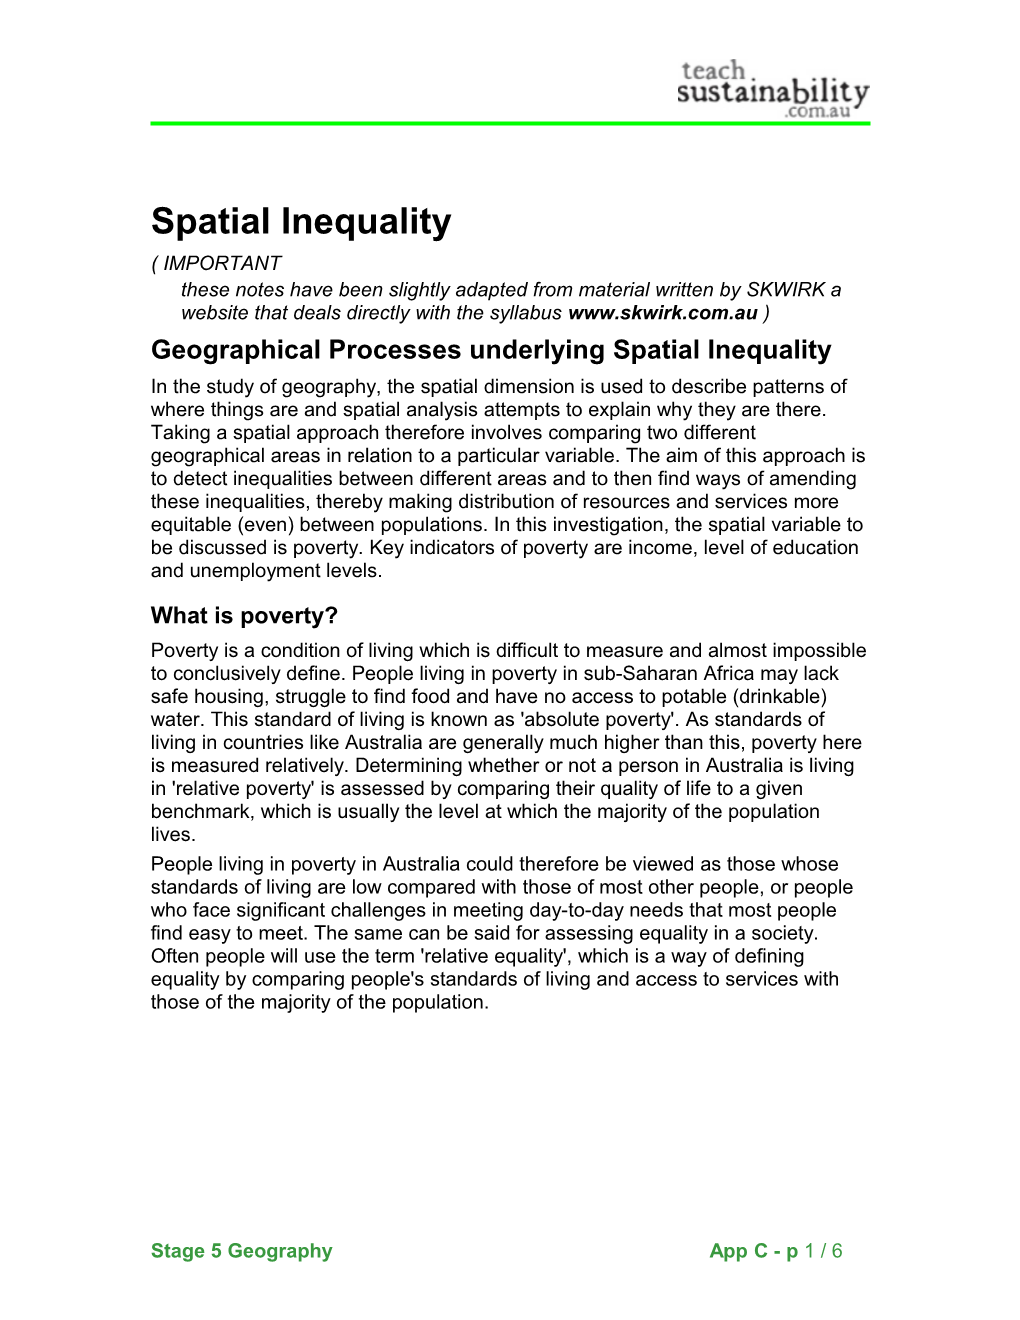 Geographical Processes Underlying Spatial Inequality